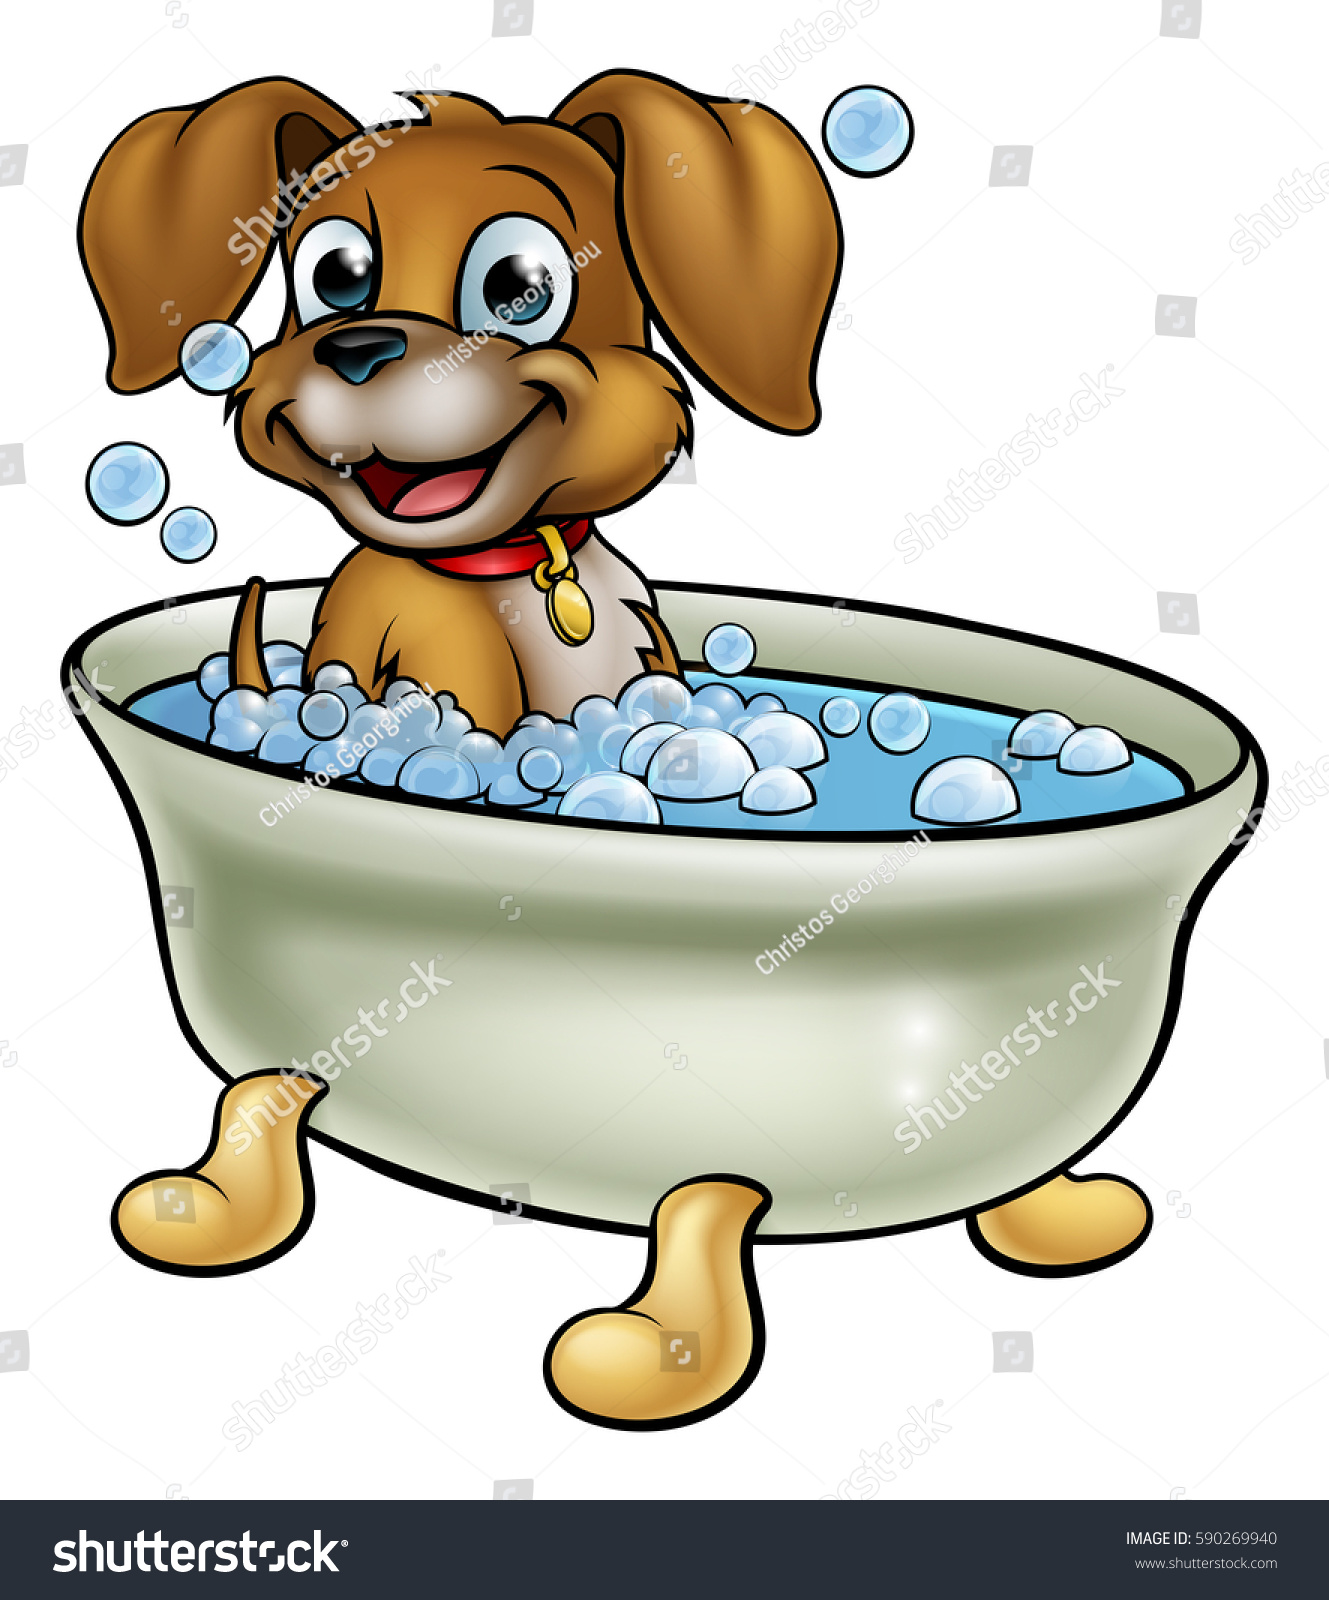 SVG of A cartoon dog having a bath with lots of bubbles svg